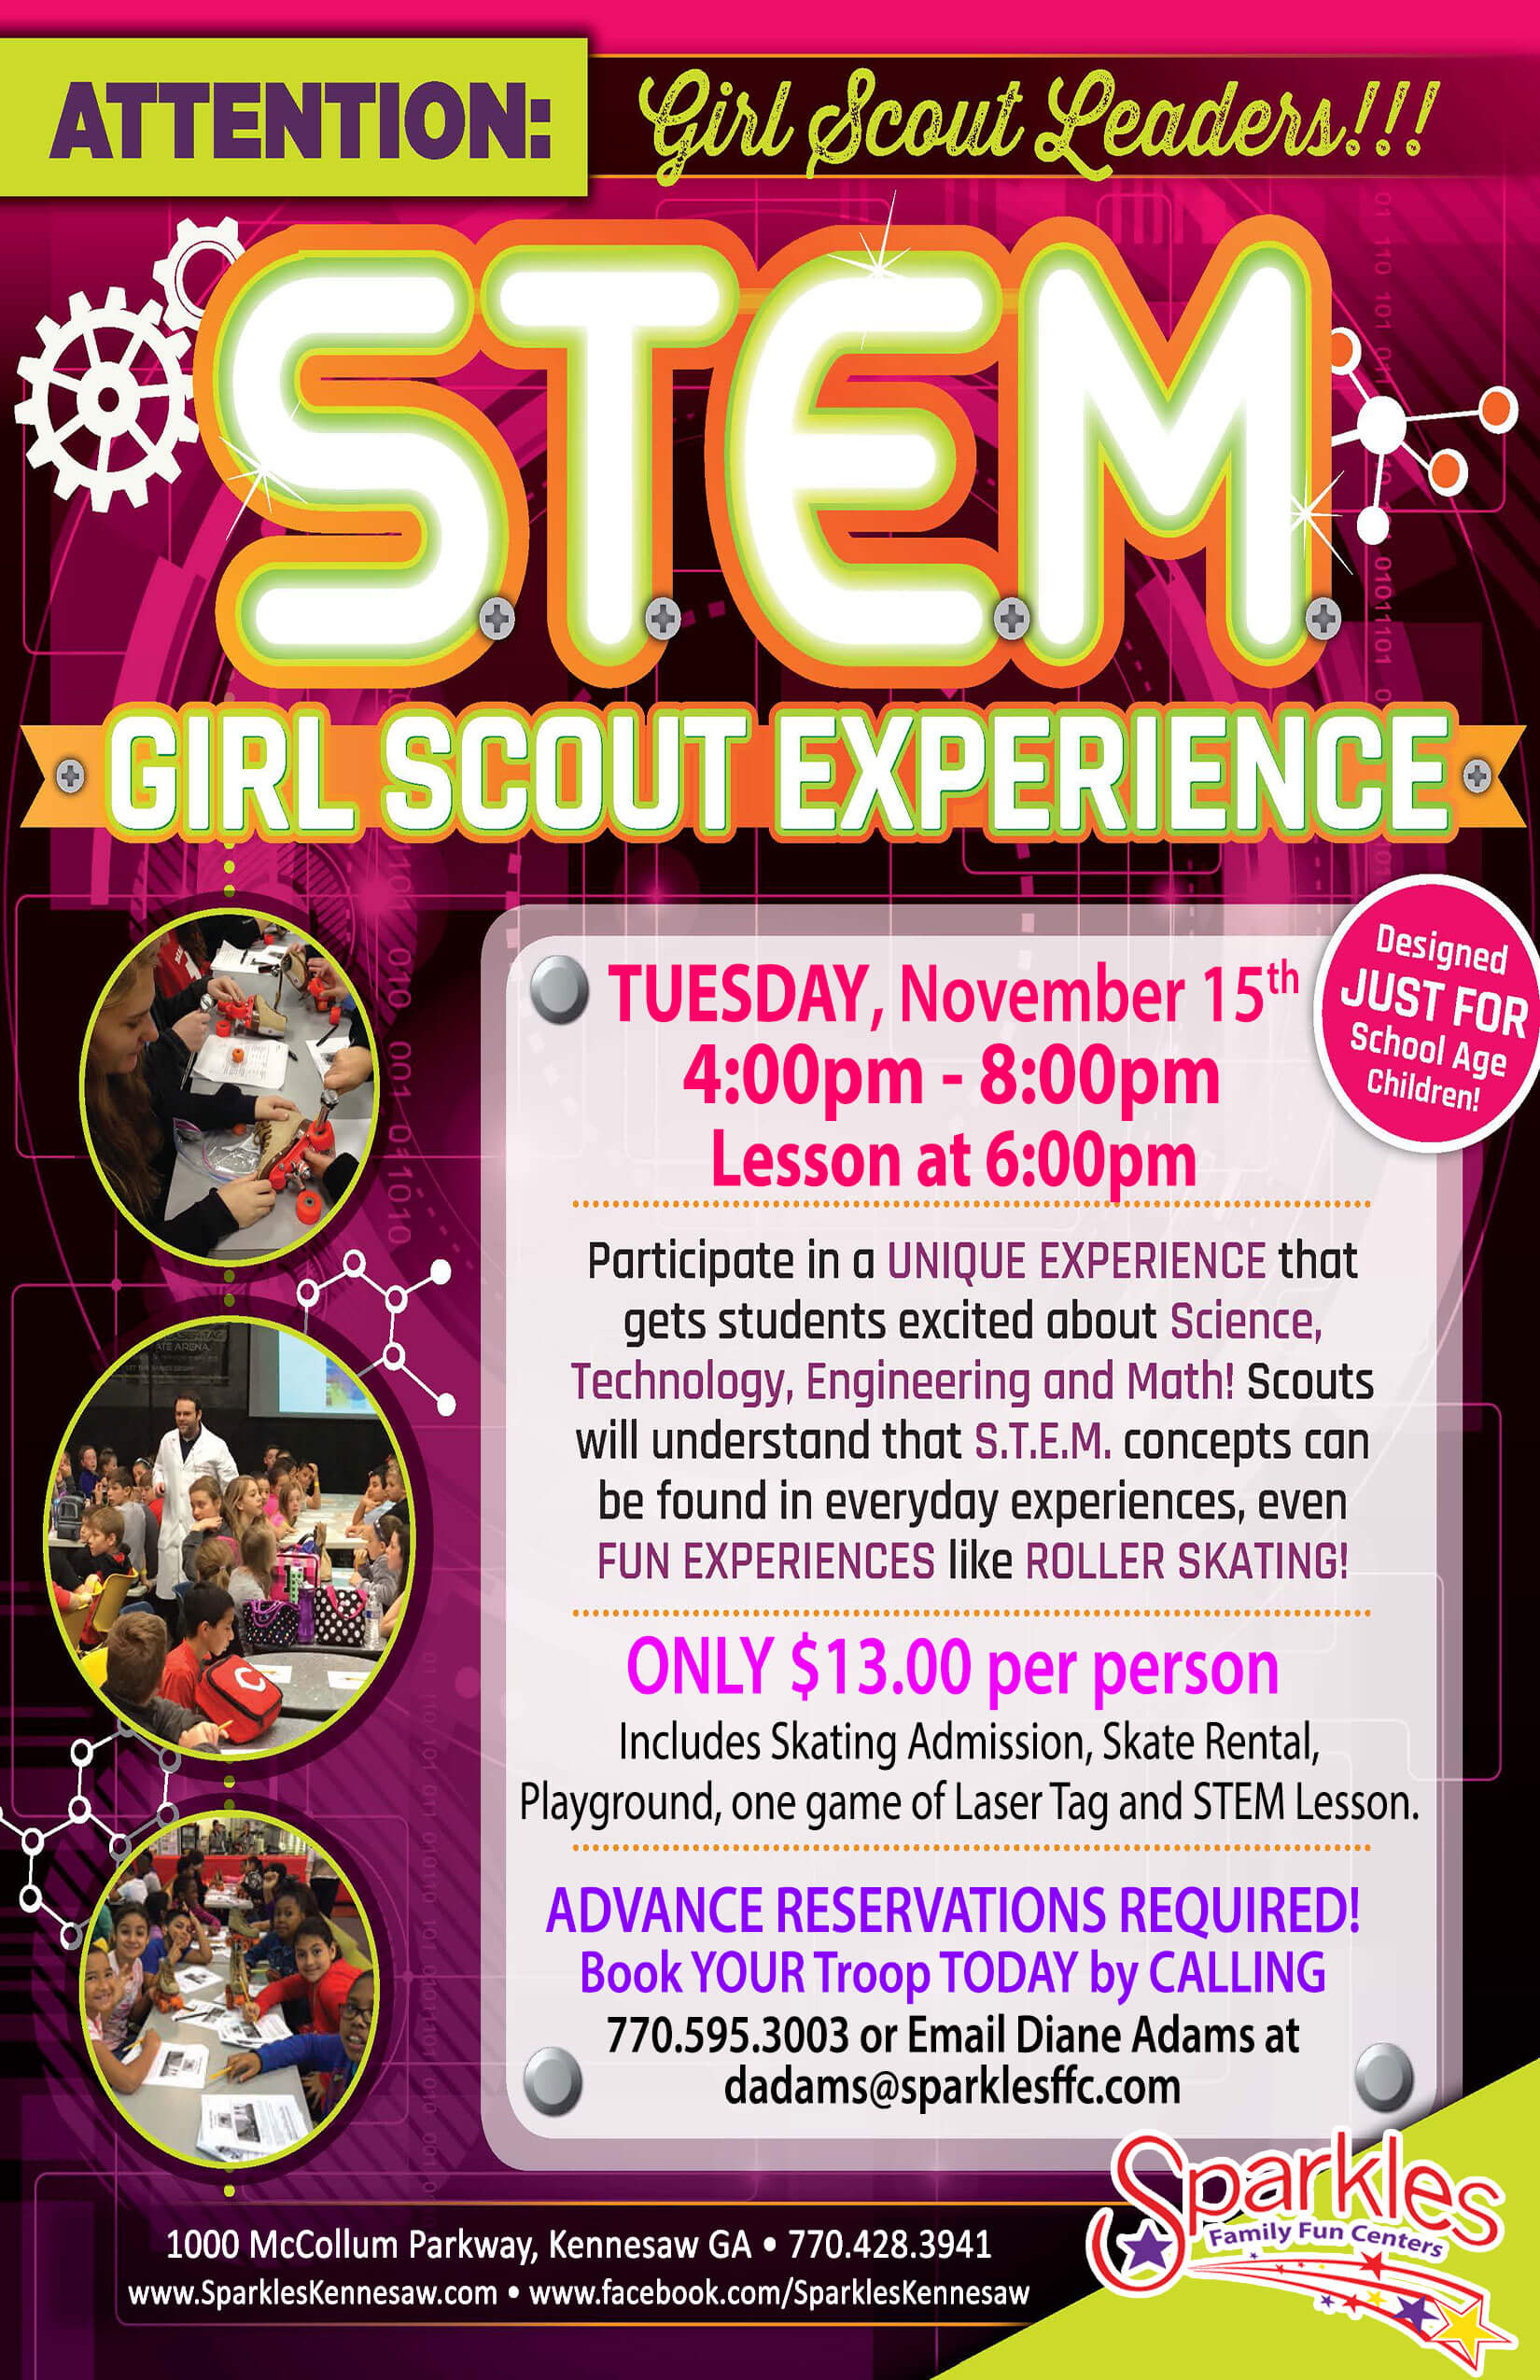 spring into stem girl scouts discount code